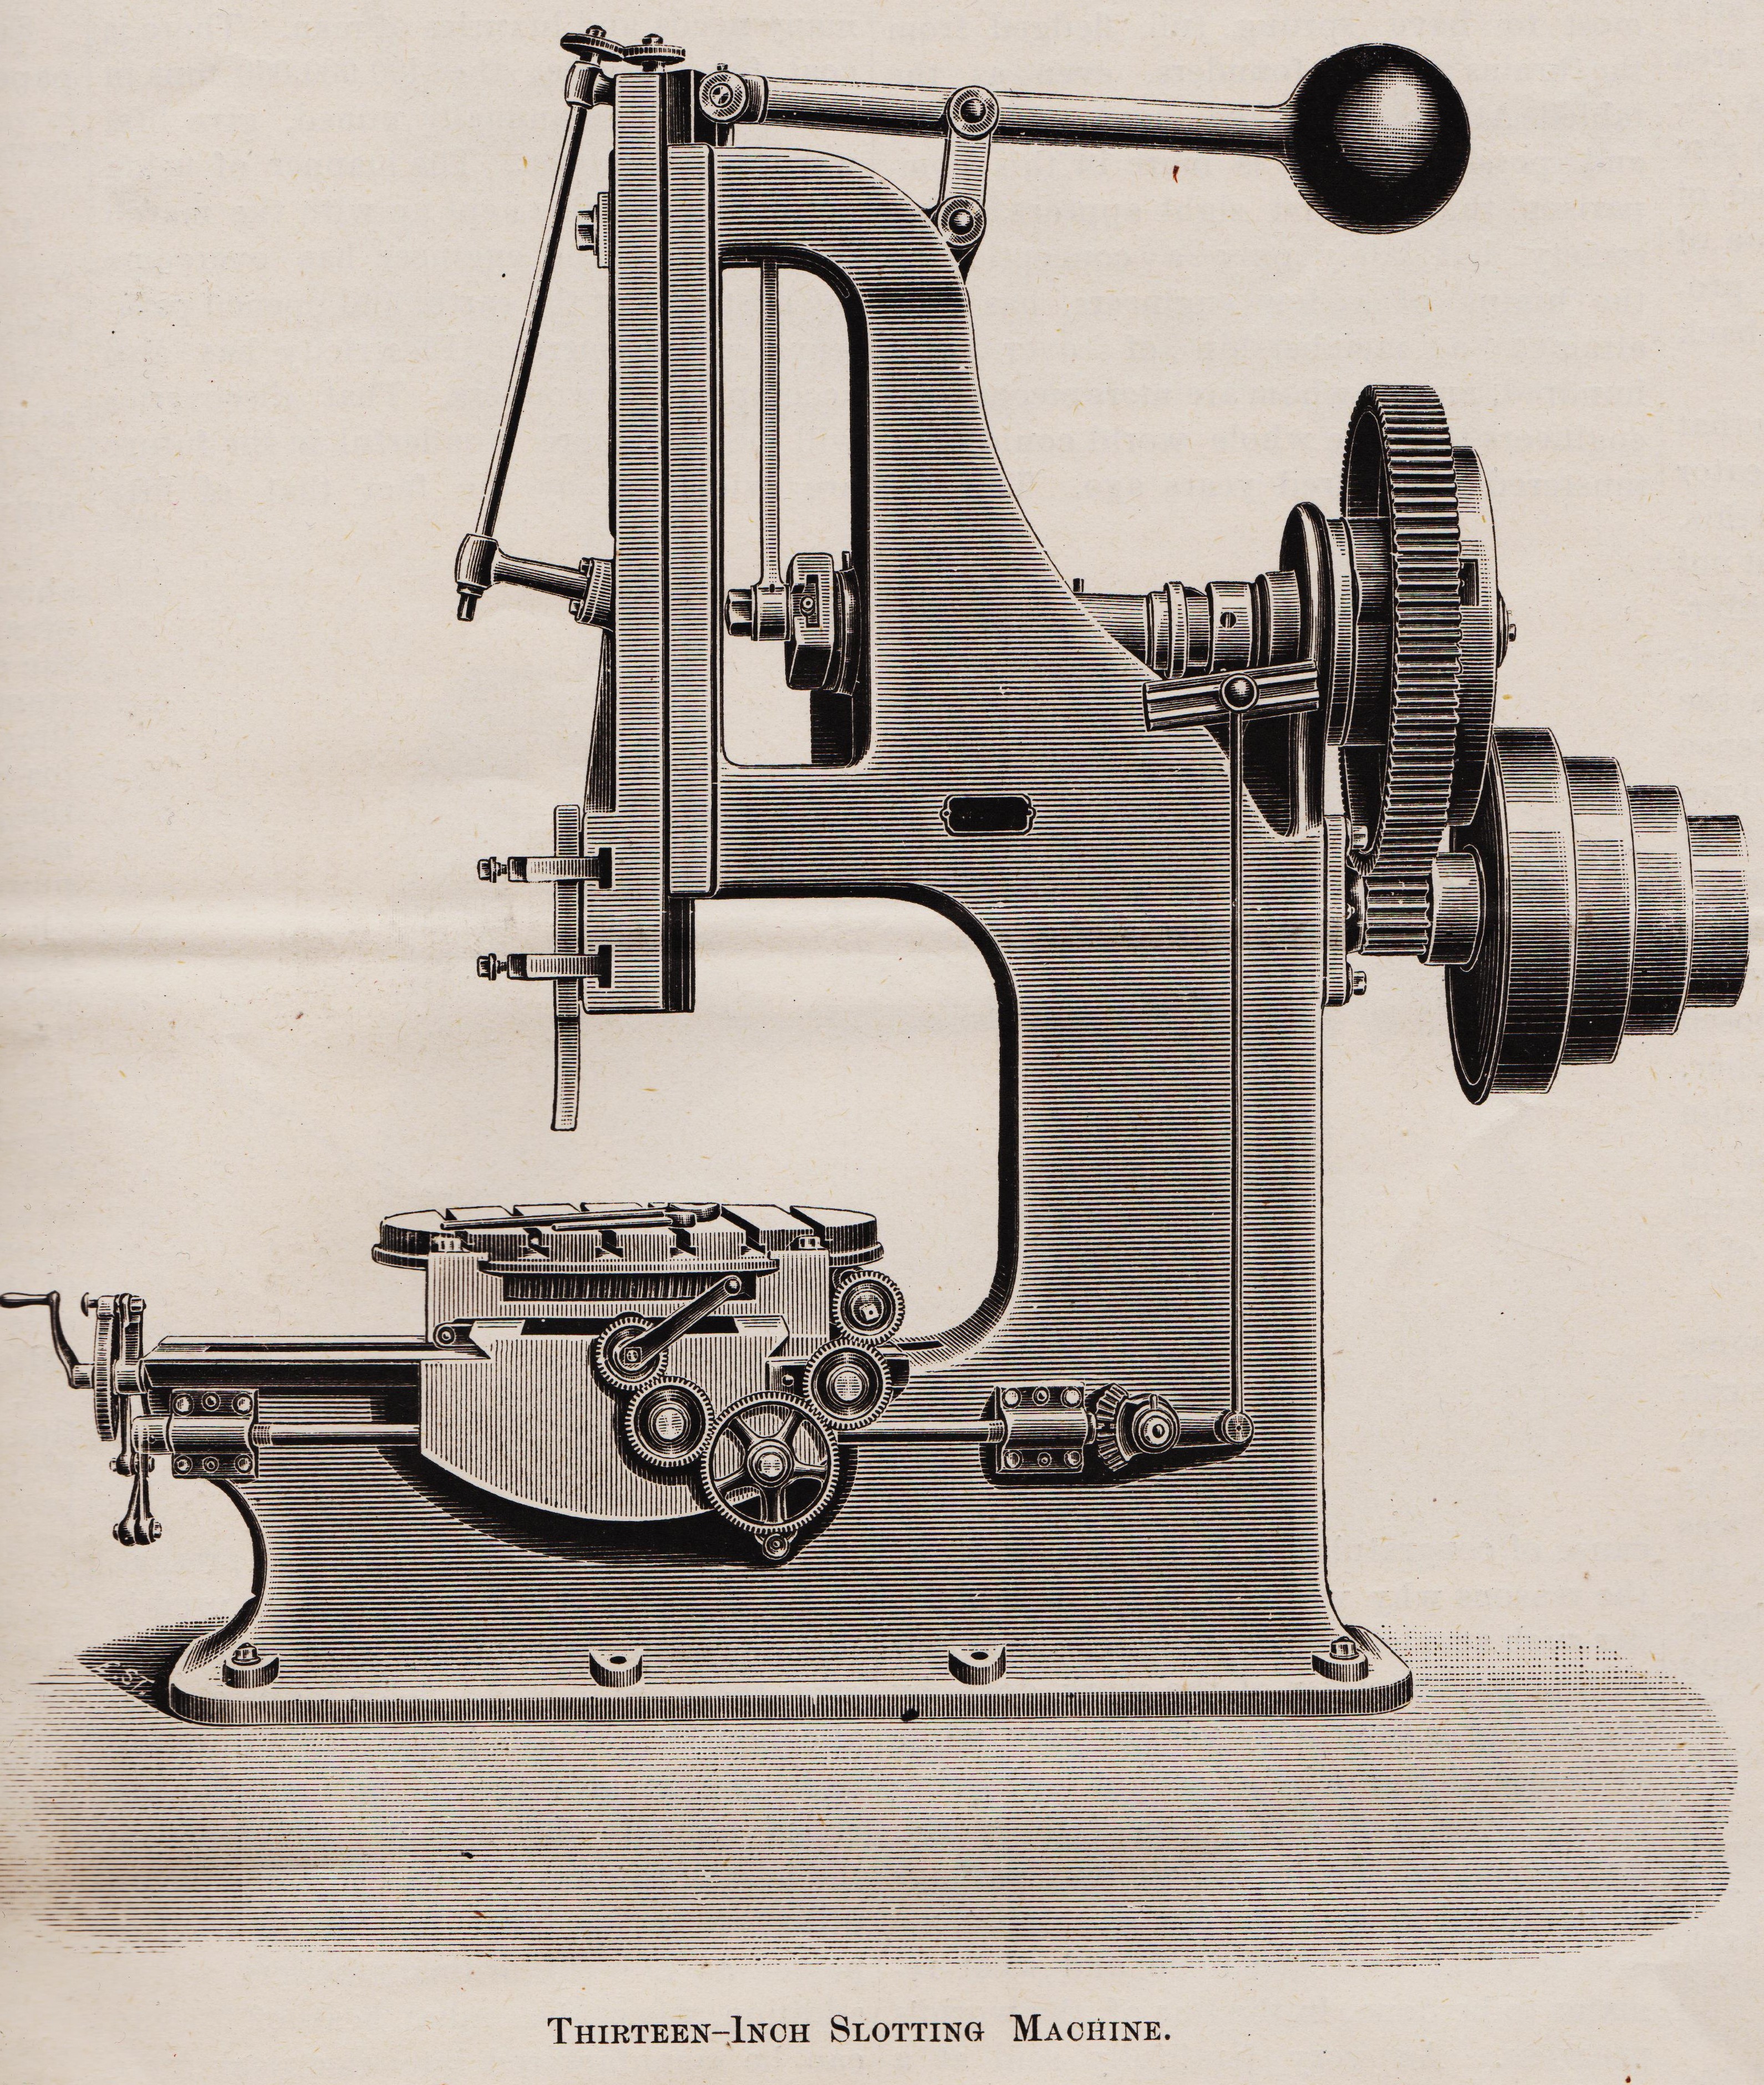 https://antiquemachinery.com/images-American-Machinist-Dec-17-1887/Slotter-13-inch-13-inch-Verticle-Slotter-Newark-Machine-Works-American-Machinist-Dec-17-1887.jpeg